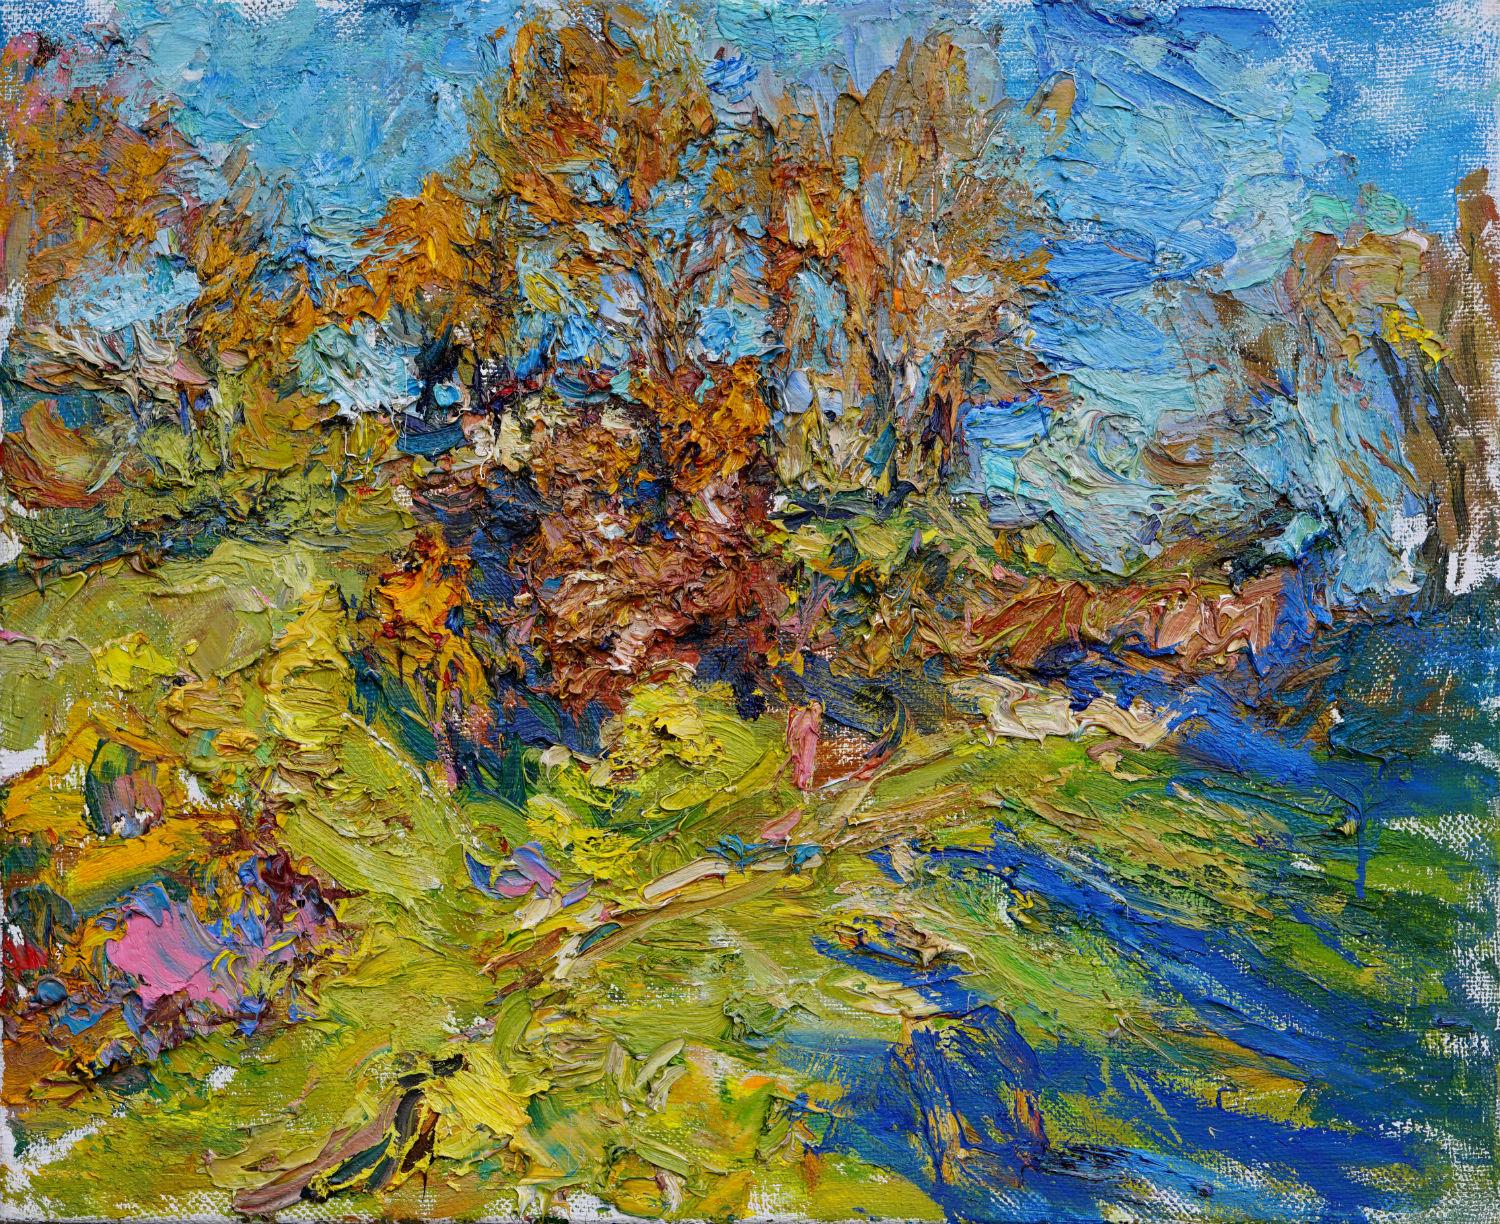 Ulrich Gleiter Landscape Painting - "Sunny Morning in Fall" Oil Painting